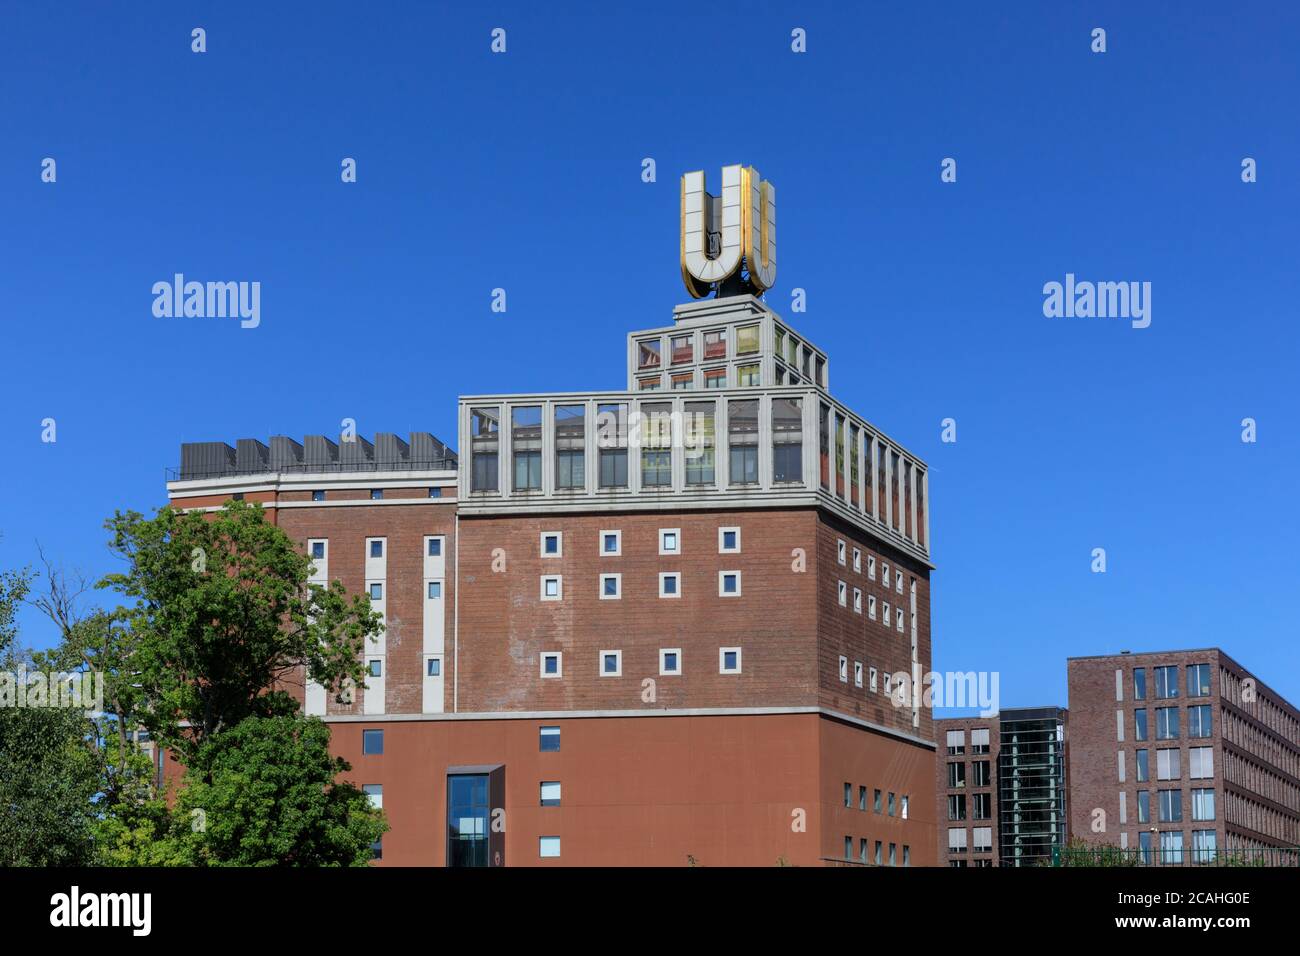 Dortmund U-Tower or Dortmunder U, landmark former Union Brewery, now a centre for art and culture , Germany Stock Photo